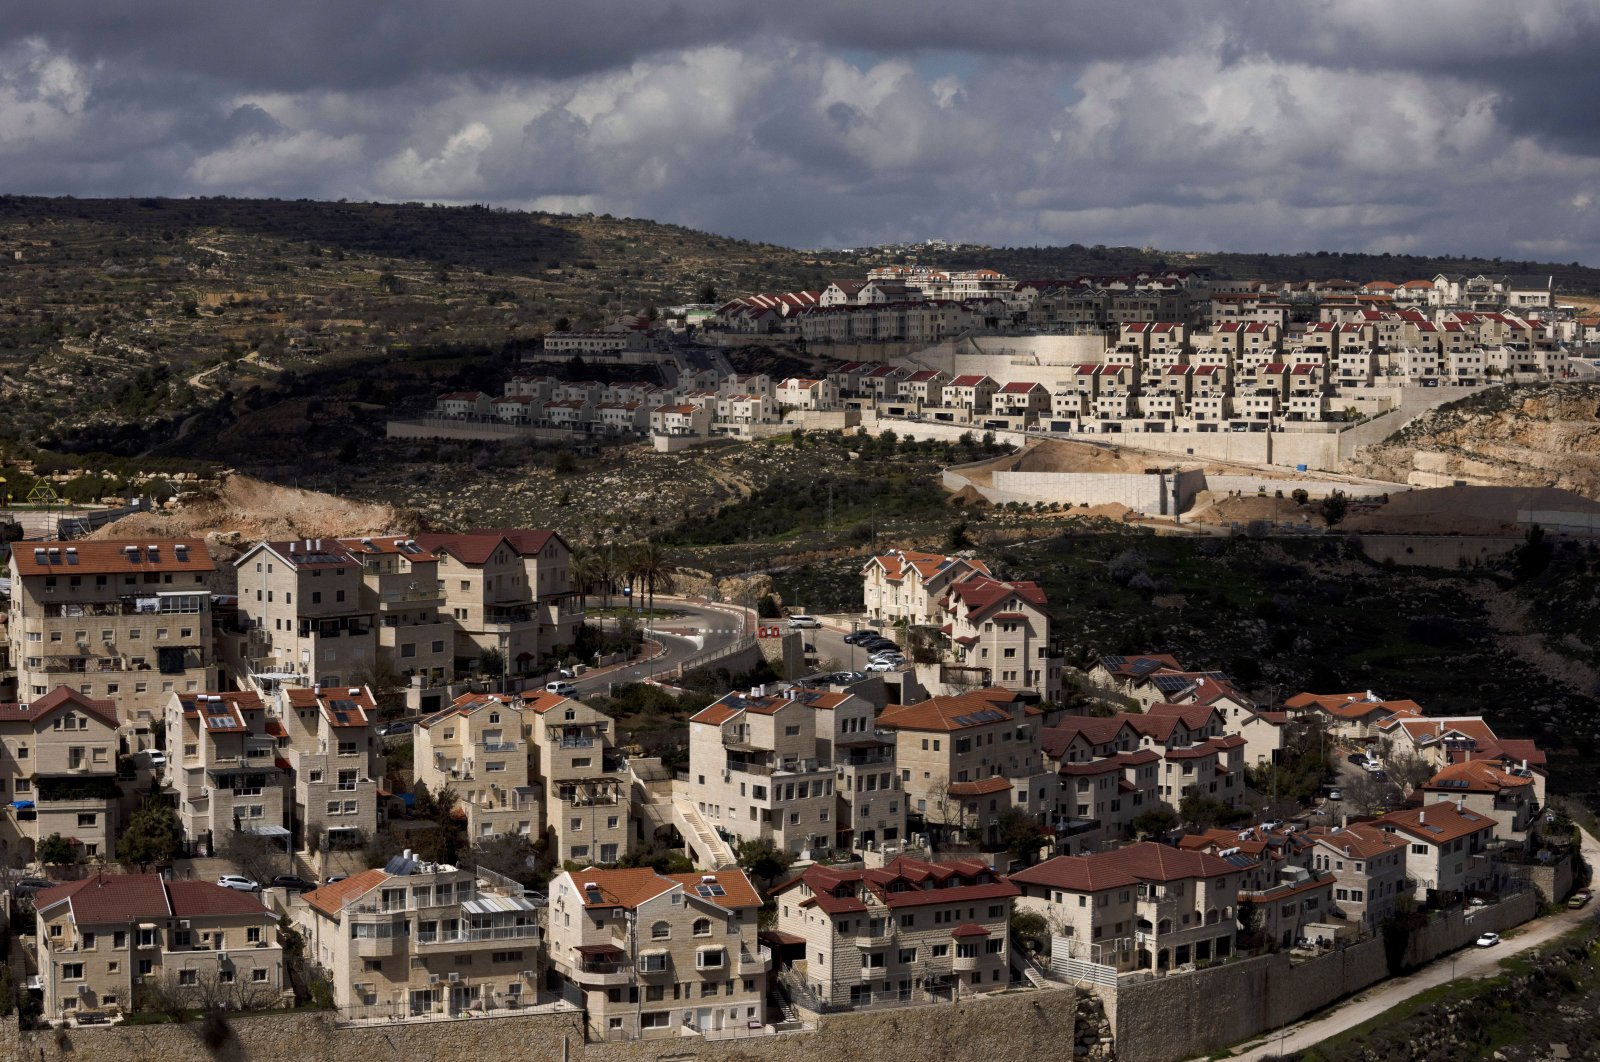 Booking.com to warn users over listings in occupied West Bank